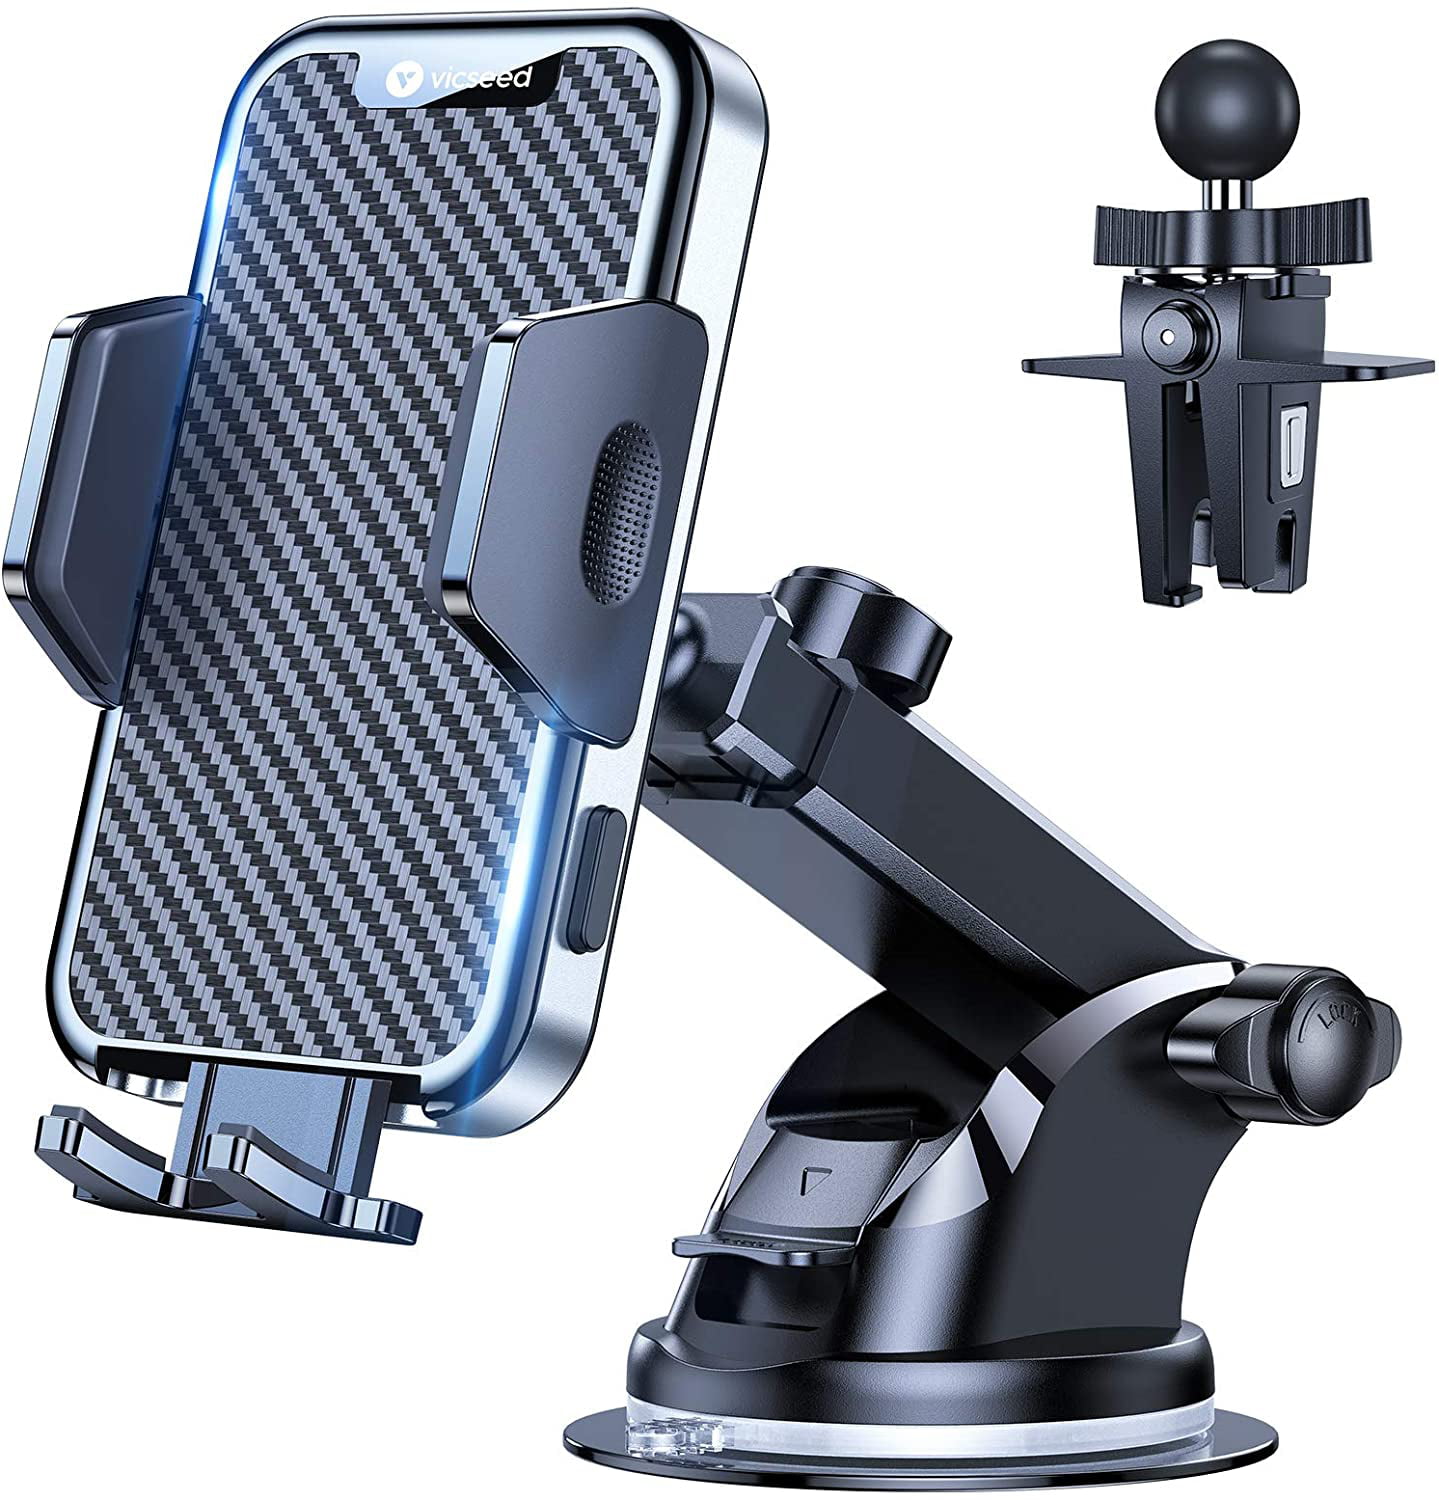 Galaxy S and More Phone Holder for Car WixGear Universal Dashboard Windshield Phone Car Suction Cup Mount Holder for Cell Phone 360 Degree Rotation Compatible with iPhone Xs/XS Max 8/7 6 